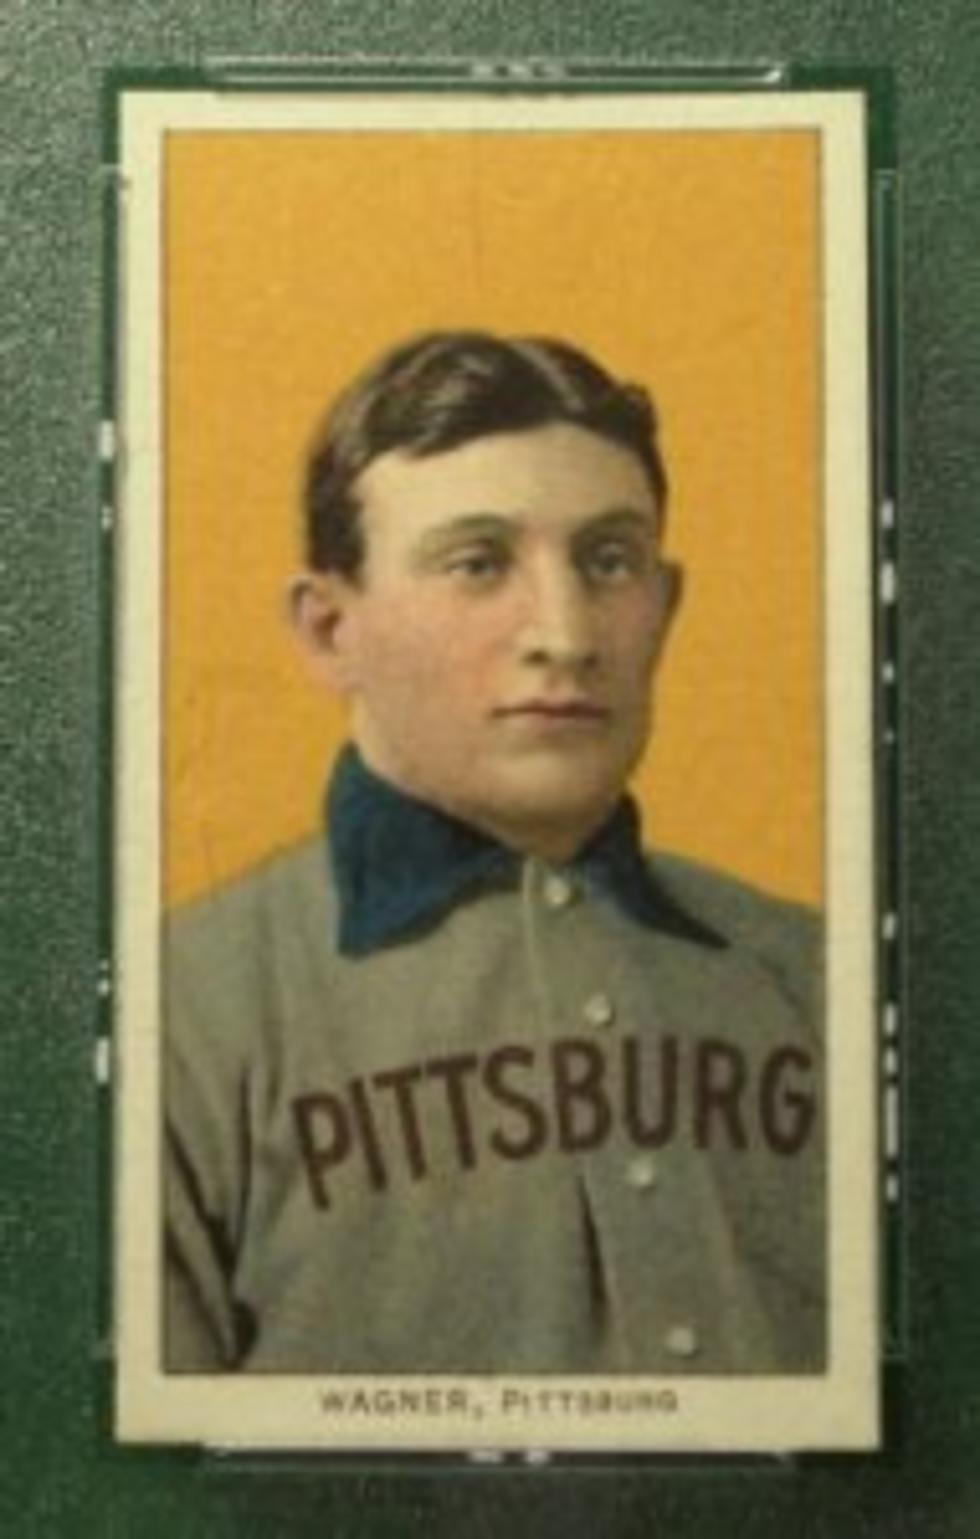 Baseball Cards Found In Attic Sell For Big Money